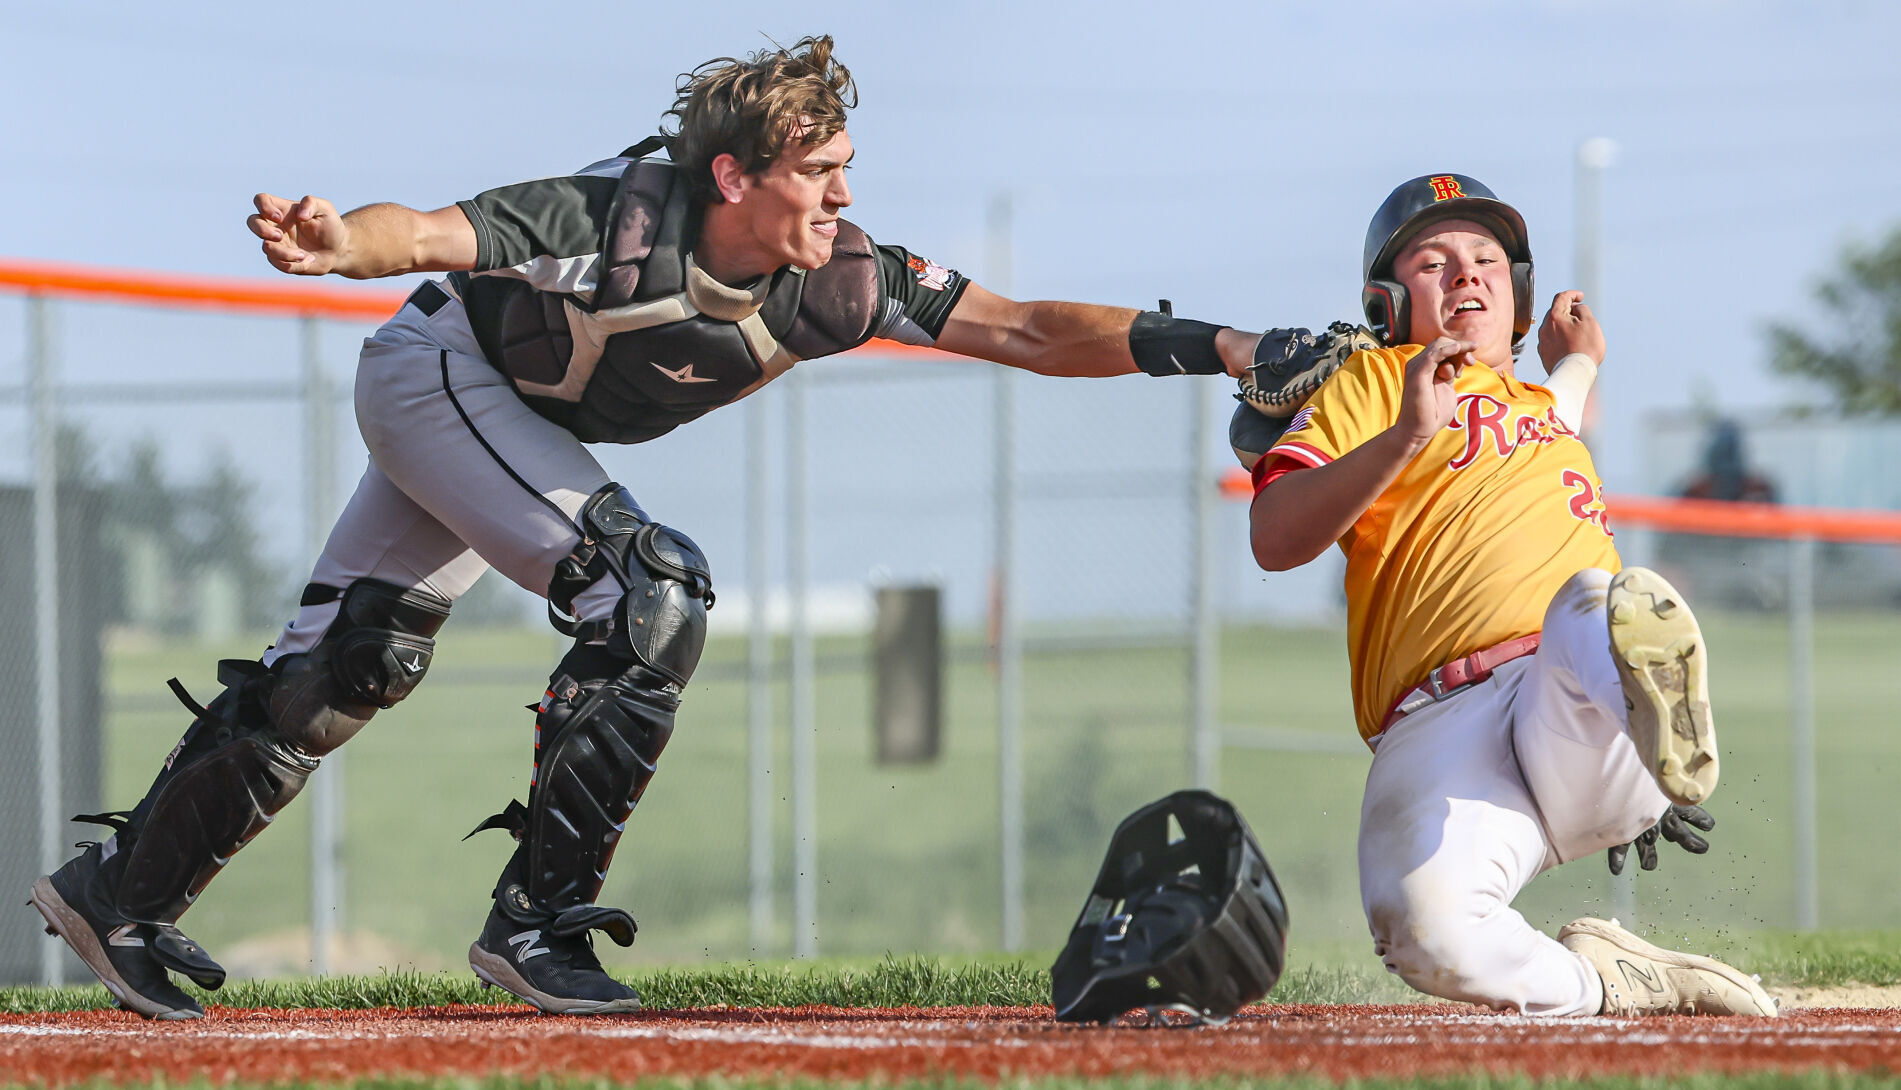 Rock Island Dominates Normal West in Class 4A Baseball Semifinal Victory